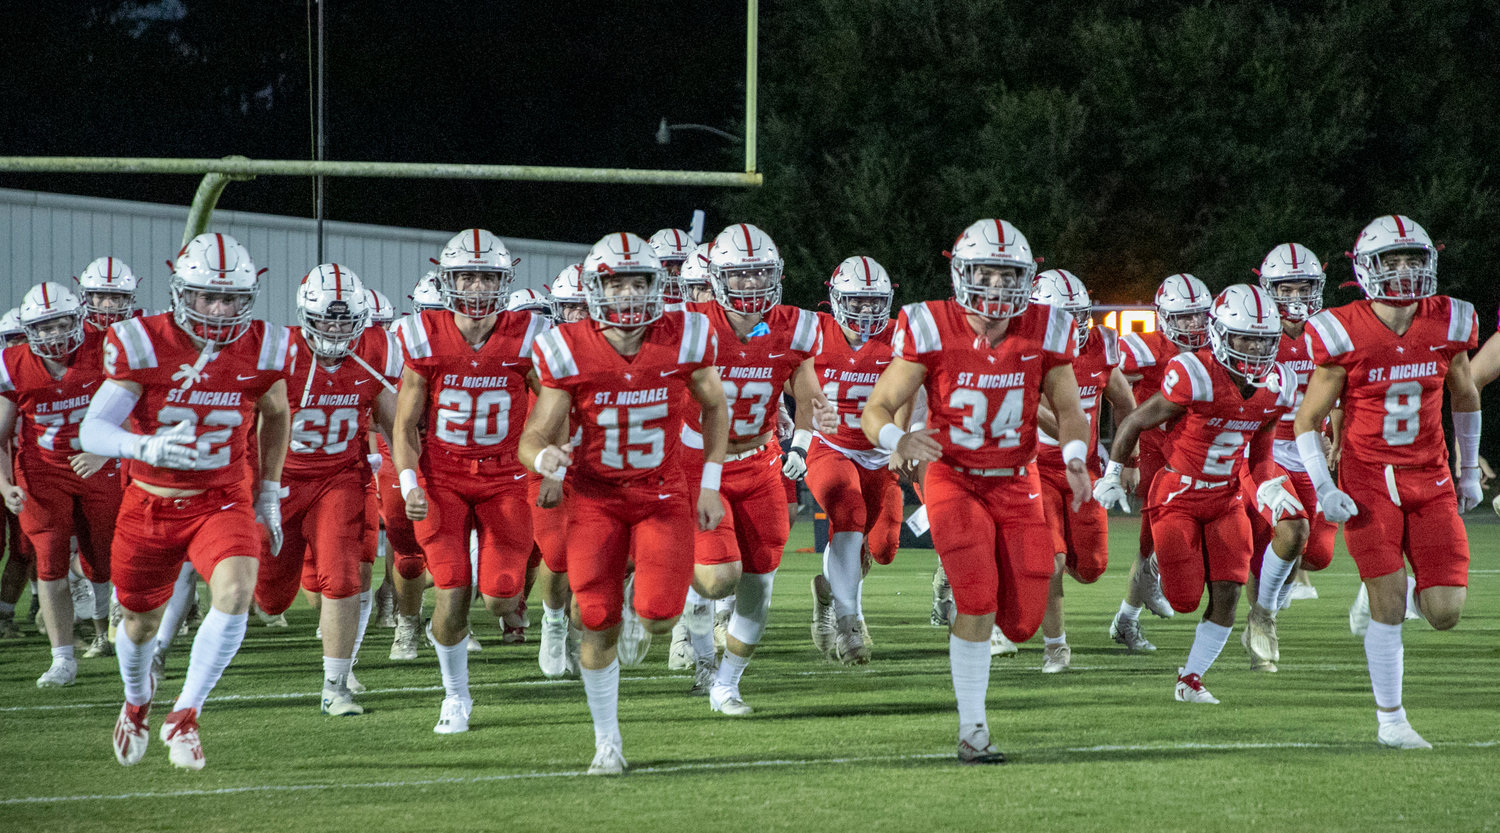 The St. Michael Catholic Cardinals take the field for their Class 4A Region 1 contest against the Orange Beach Makos at Fairhope Municipal Stadium Sept. 29. St. Michael kicks off Week 9 with a Thursday matchup against the Jackson Aggies this week.